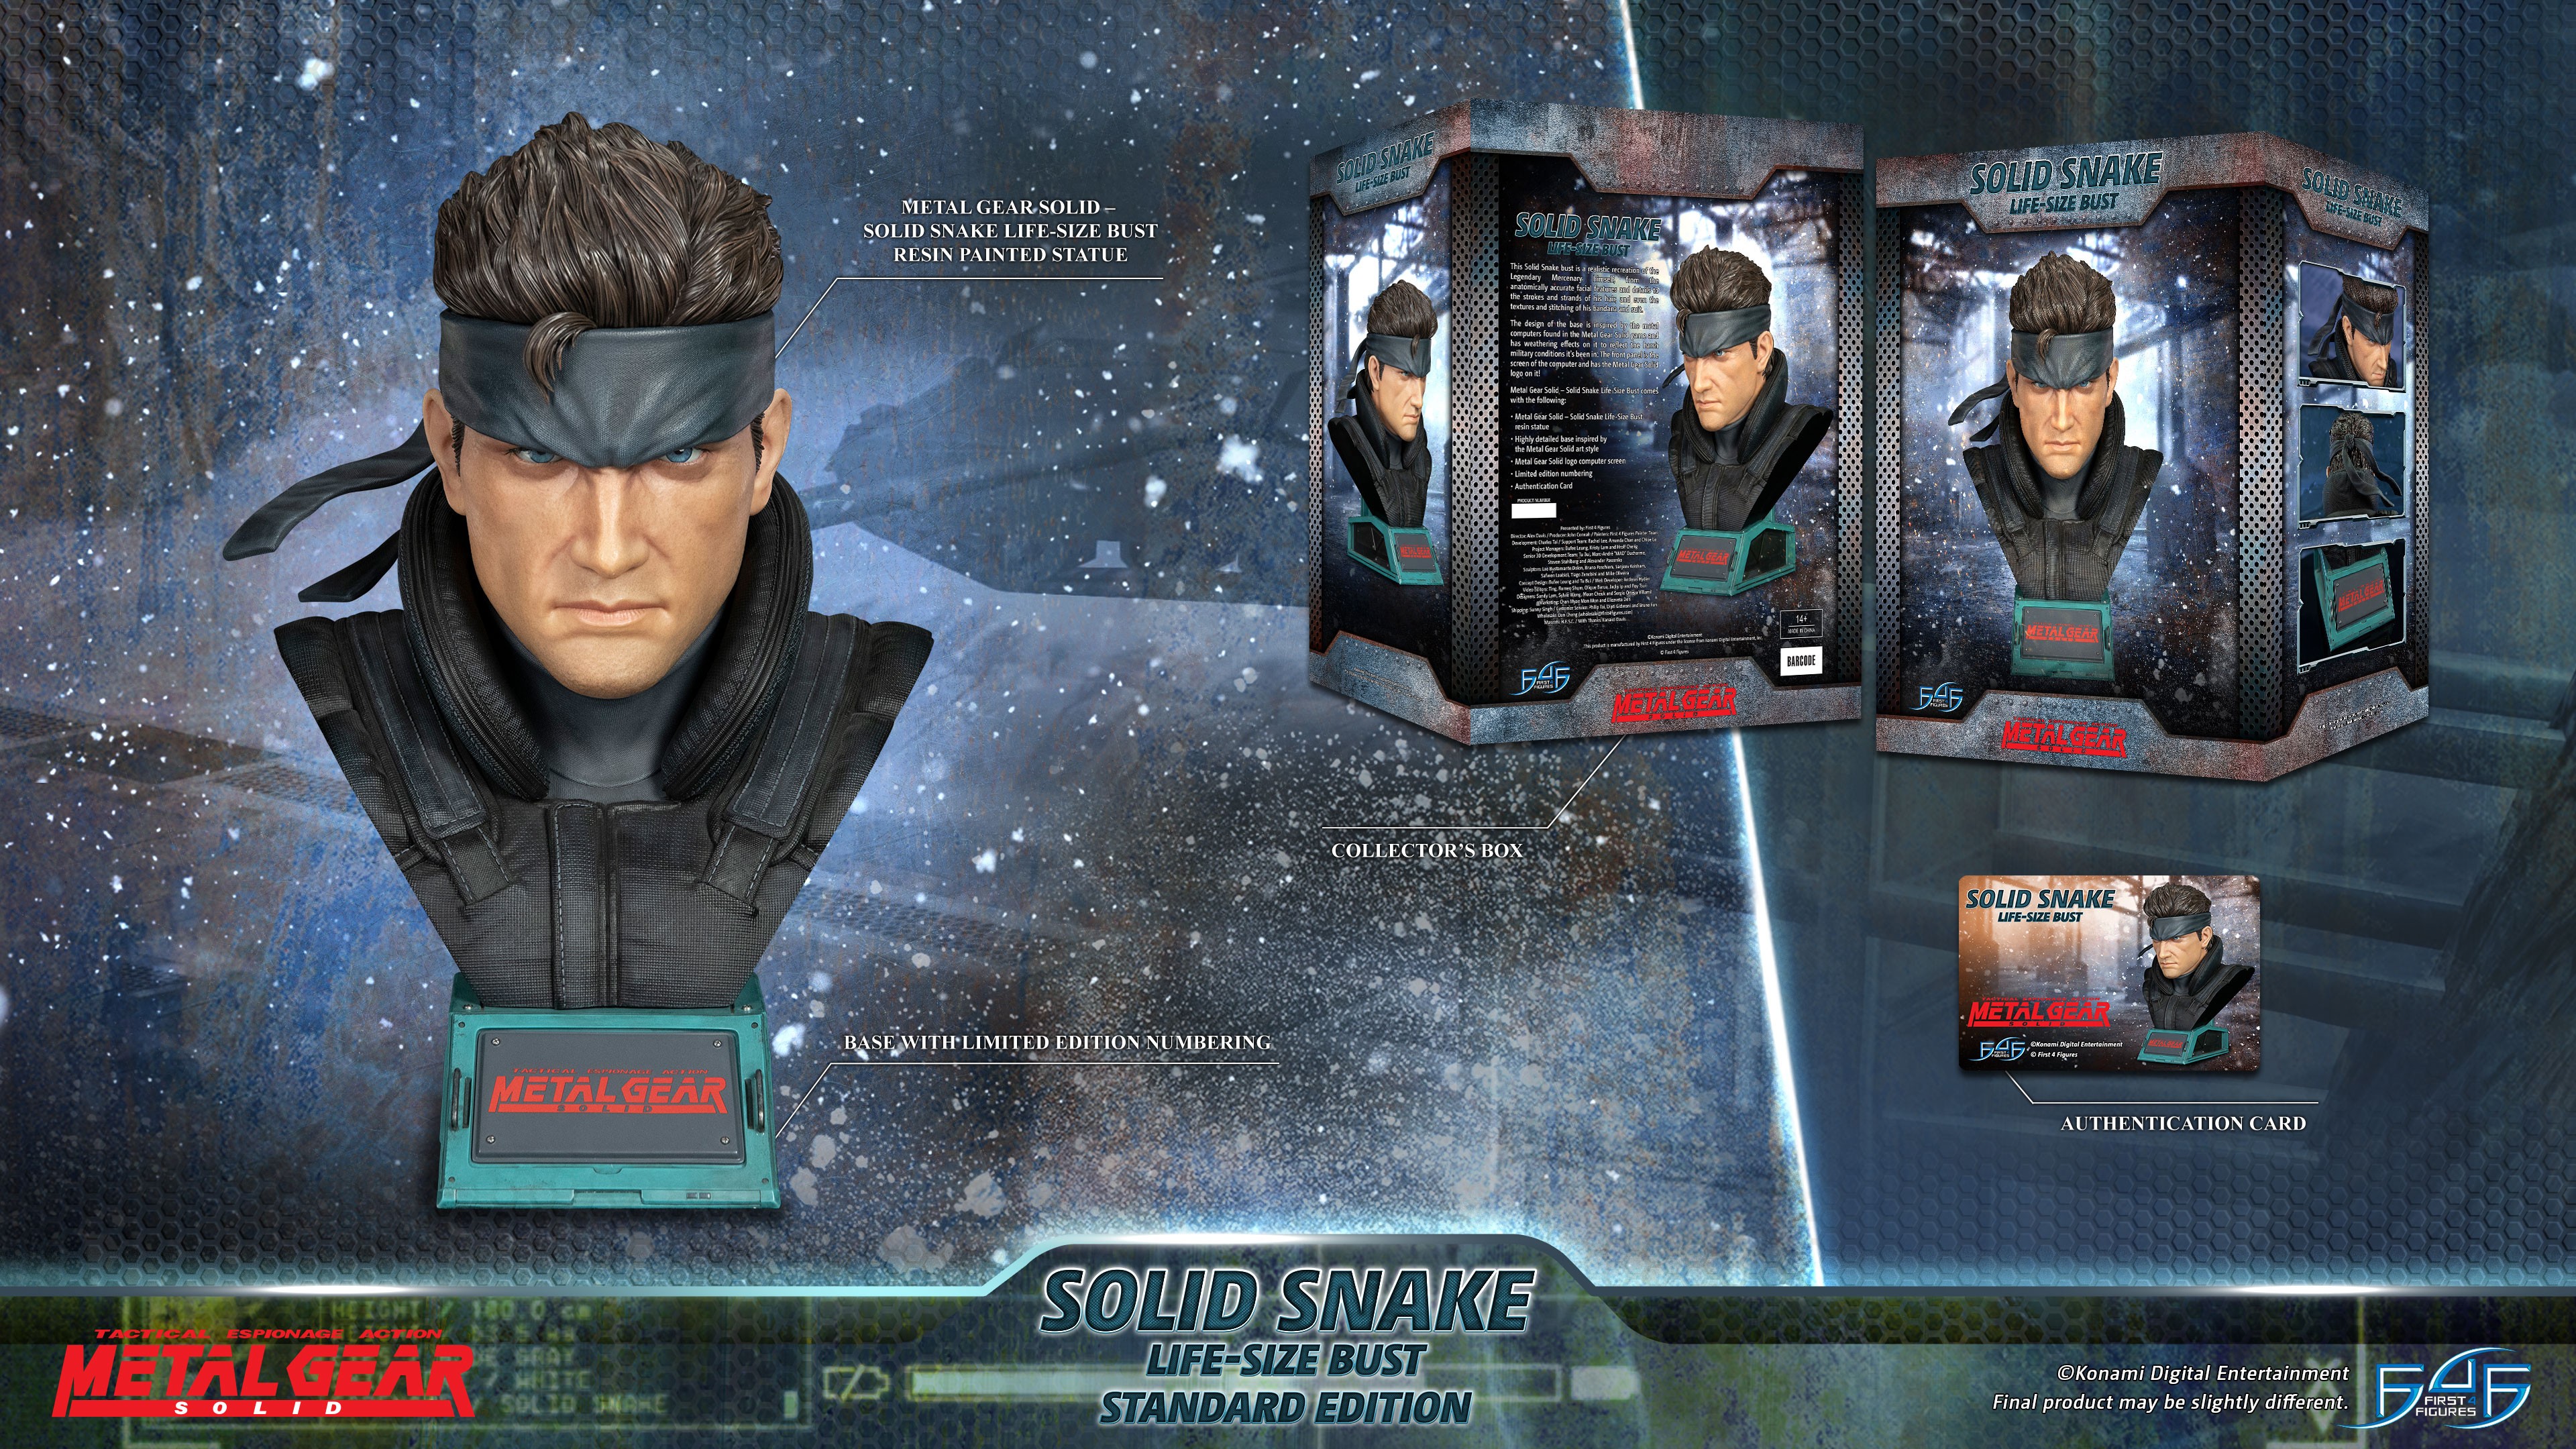 Metal Gear Solid - Solid Snake Life-Size Bust (Standard LSB)